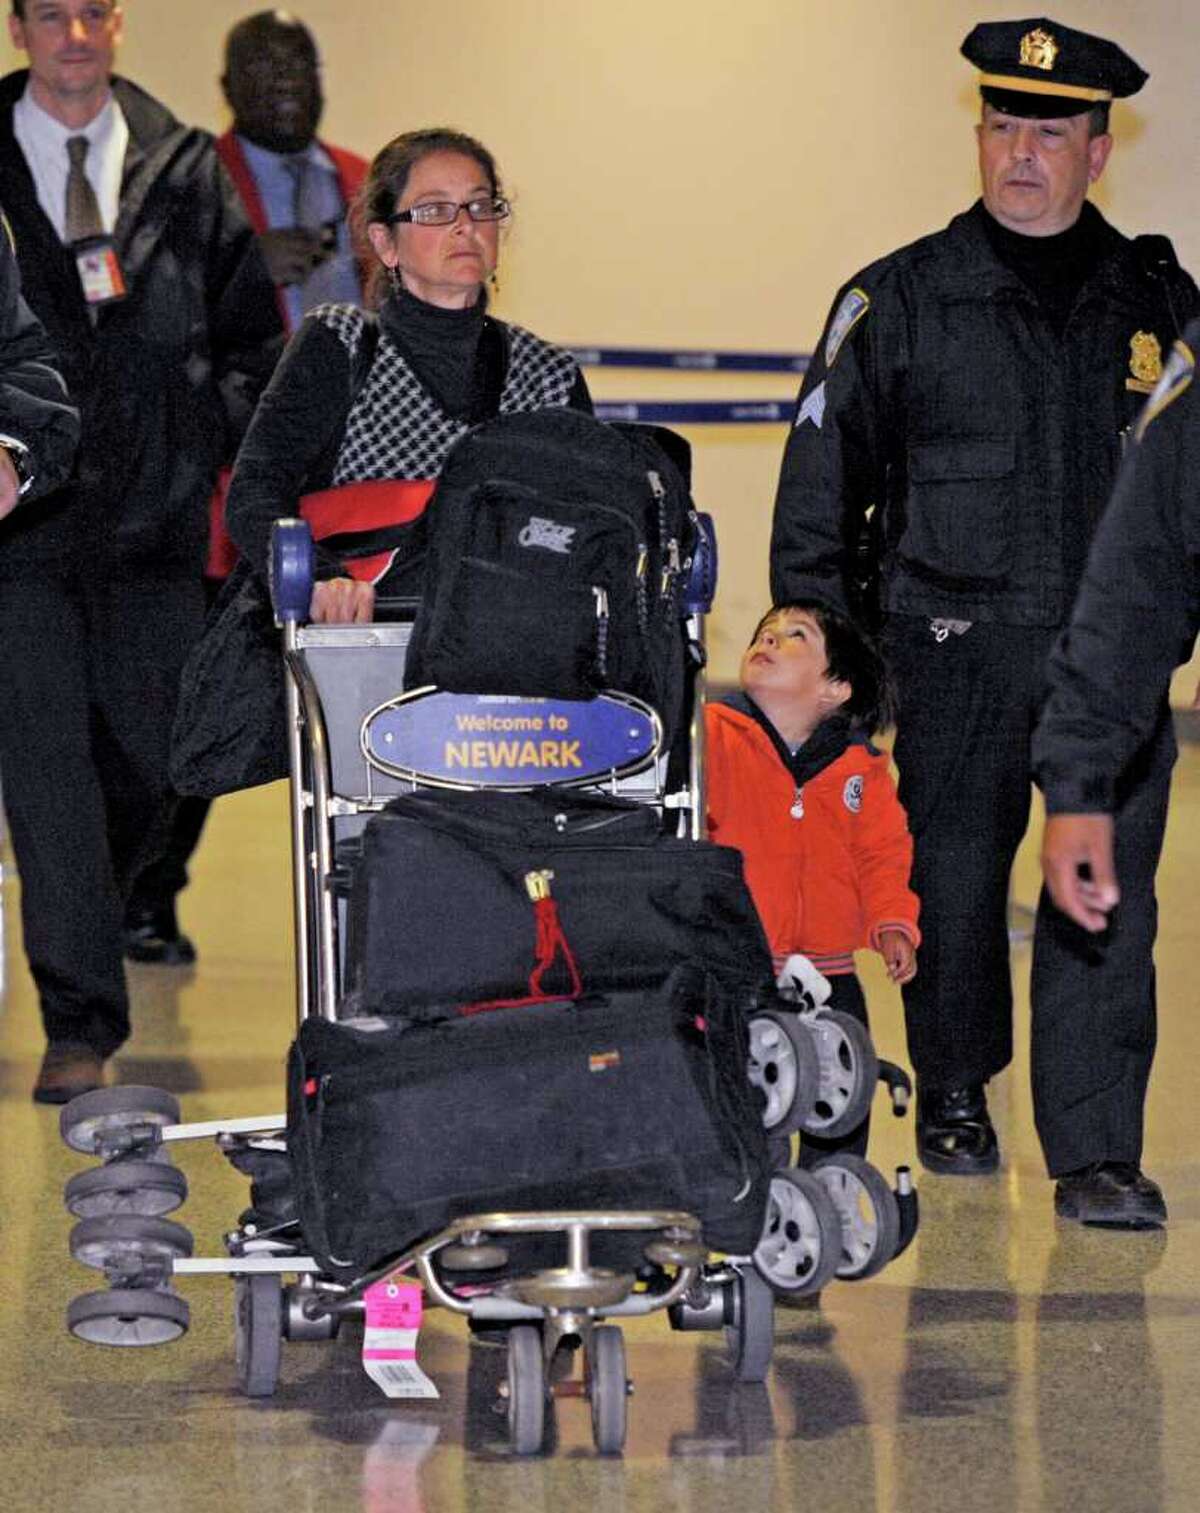 Lori Berenson arrives from Lima, Peru, with her son Salvador Apari at Newark Liberty International Airport, Tuesday, Dec. 20, 2011 in Newark, N.J. Berenson, who was convicted of aiding Peruvian guerrillas and served 15 years before she was paroled last year, said she fully intended to return to Peru by the court-ordered deadline of Jan. 11. (AP Photo/Henny Ray Abrams)